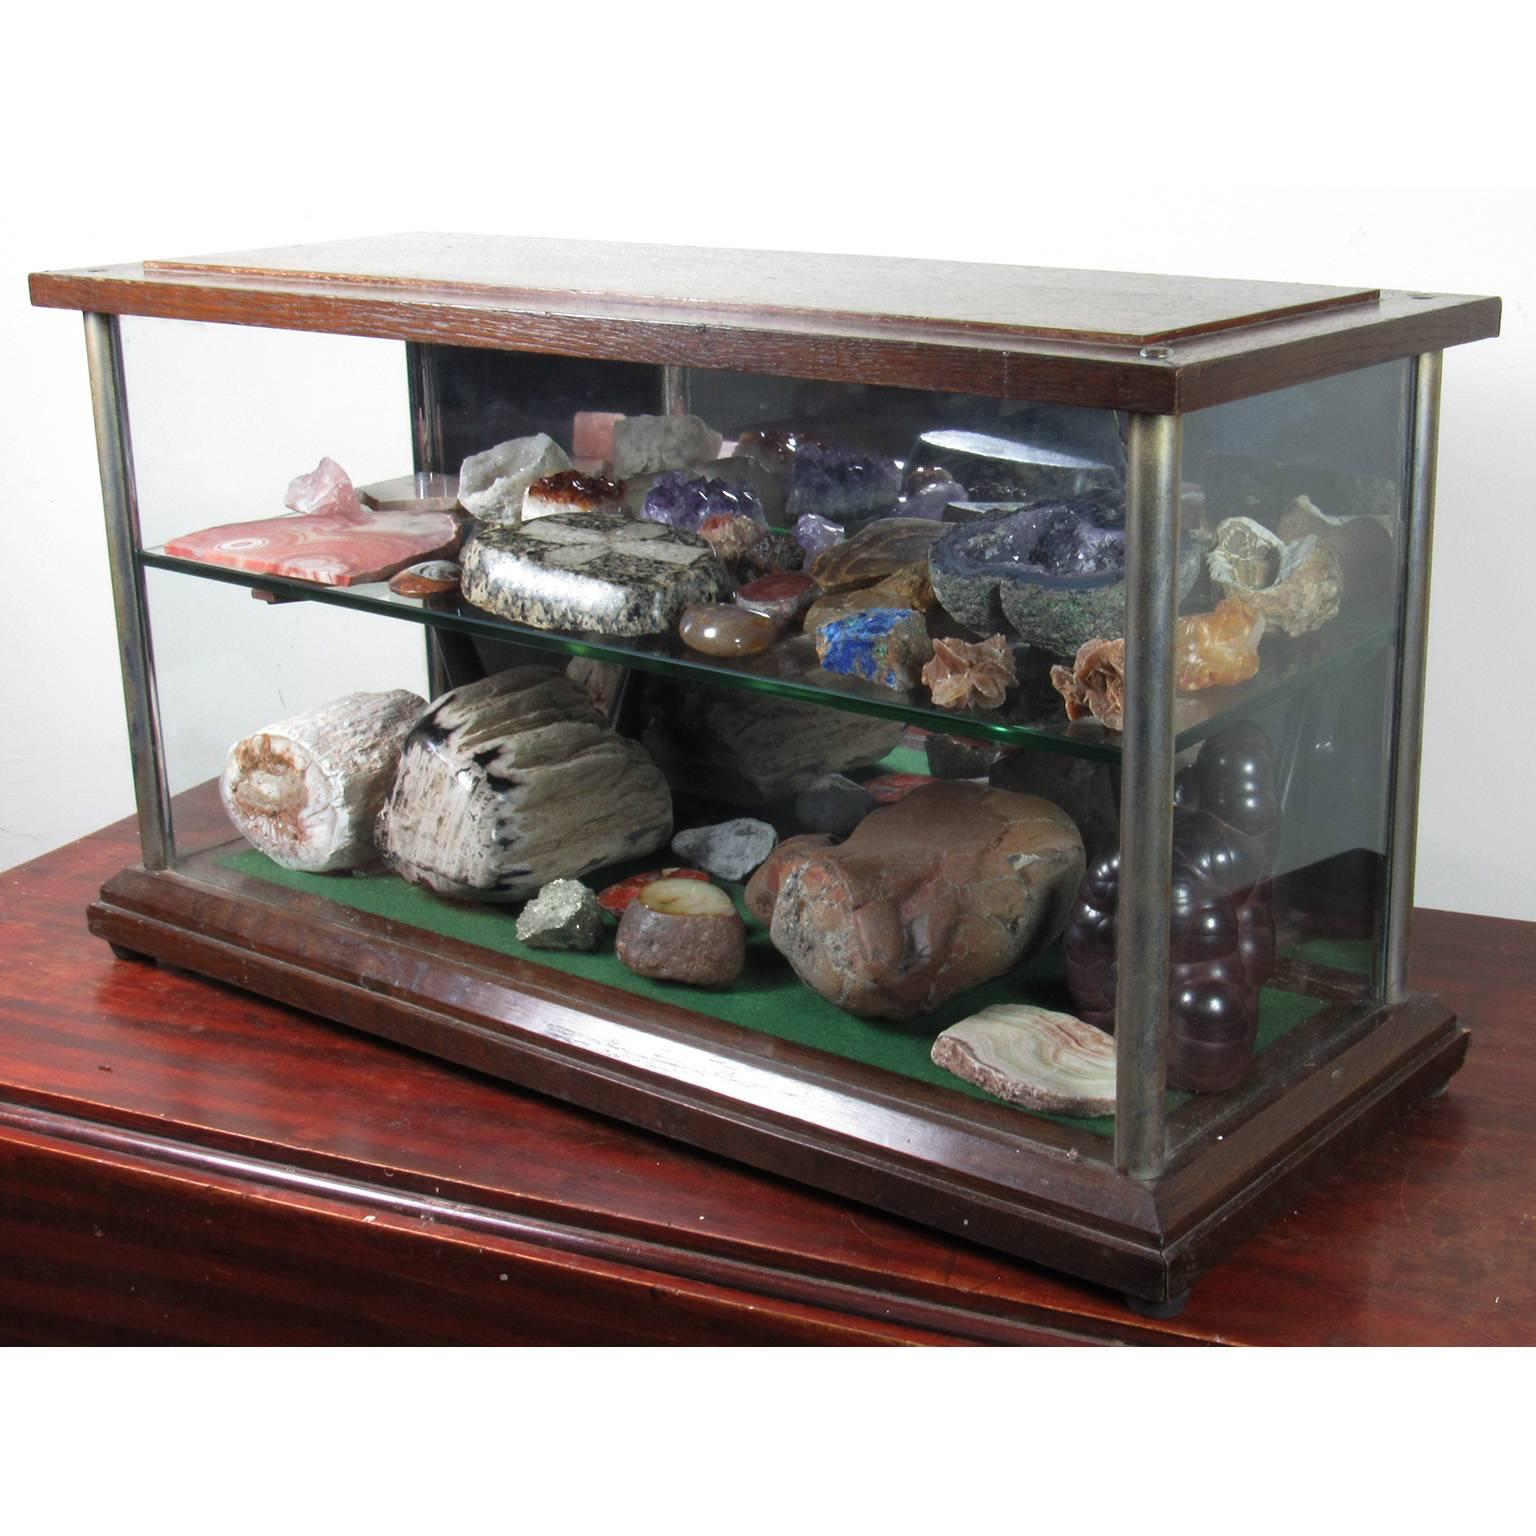 Specimen collection with 19th century mahogany and glass vitrine, comprised of approximately 37 specimens including crystal, rocks, fossils, and cross sectioned geodes. Measure: Vitrine 14 1/4 x 26 1/4 x 10 inches.